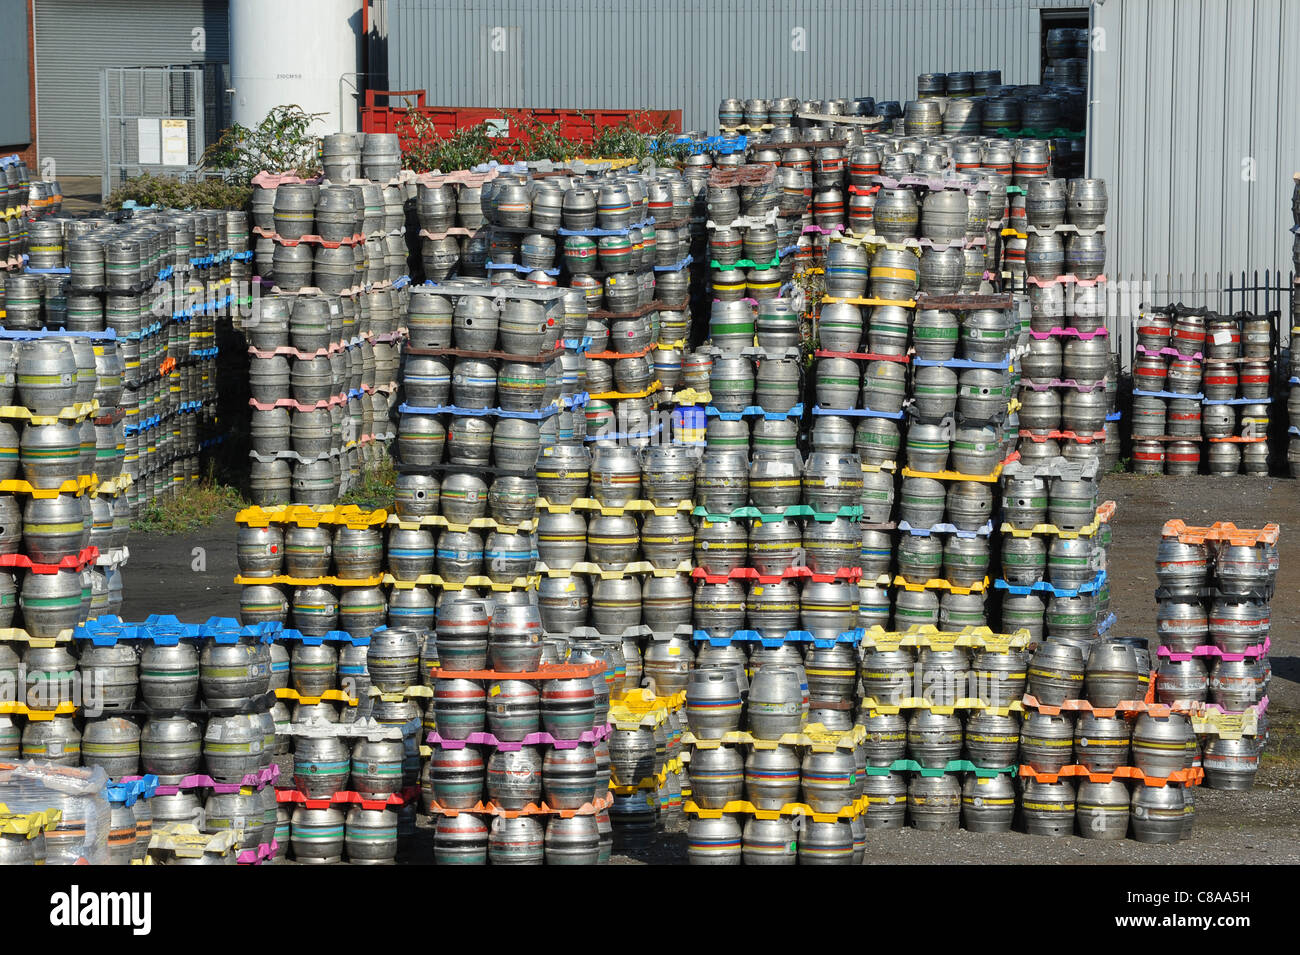 Beer kegs at Marston's Brewery at Burton-on-Trent Staffordshire England Uk Stock Photo